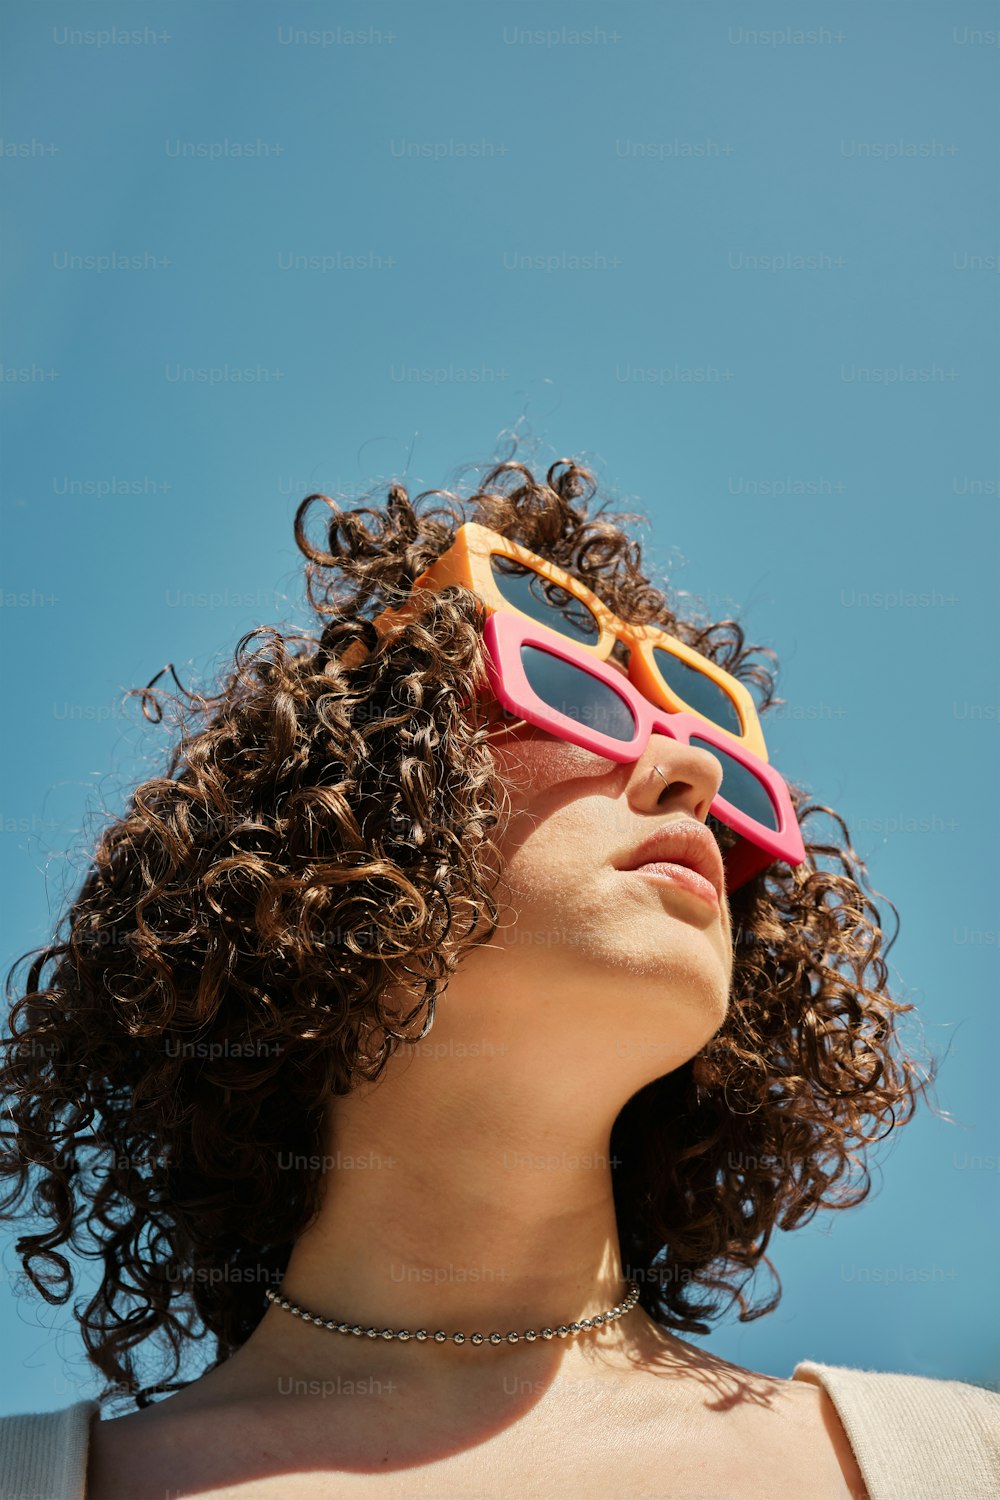 a woman with curly hair wearing sunglasses